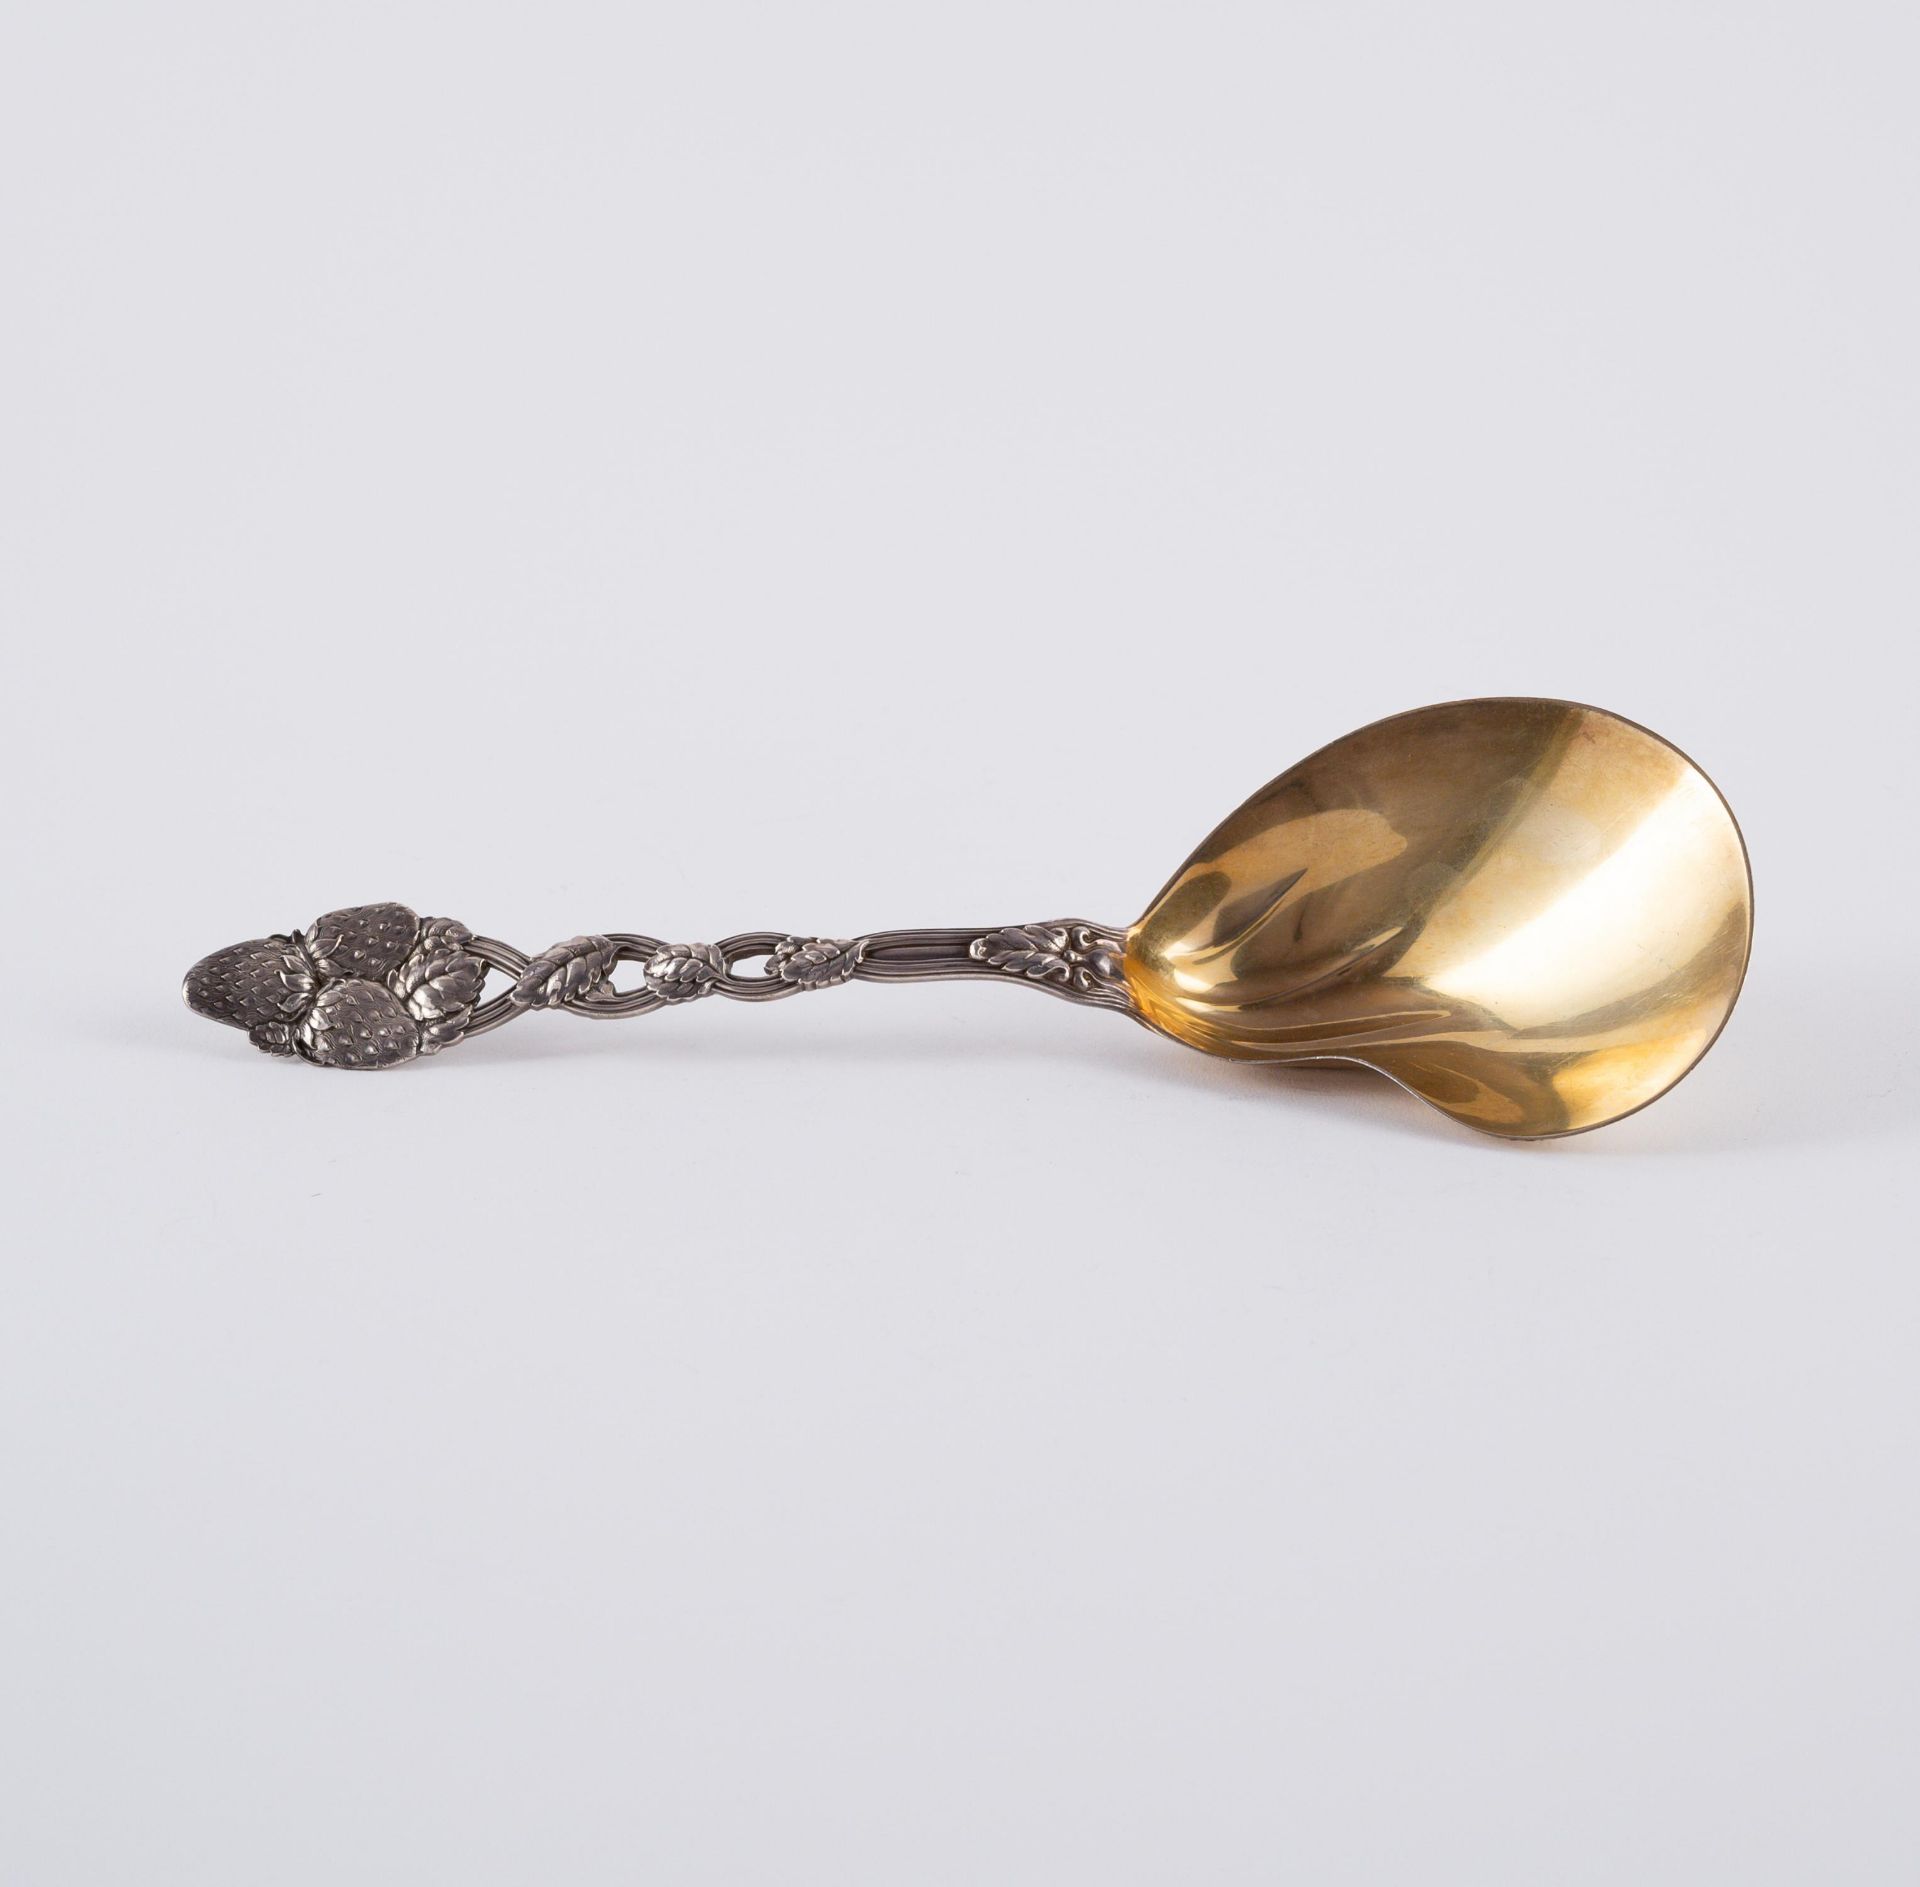 1 LARGE SILVER BERRY SPOON WITH STRAWBERRY DECOR - Image 2 of 3